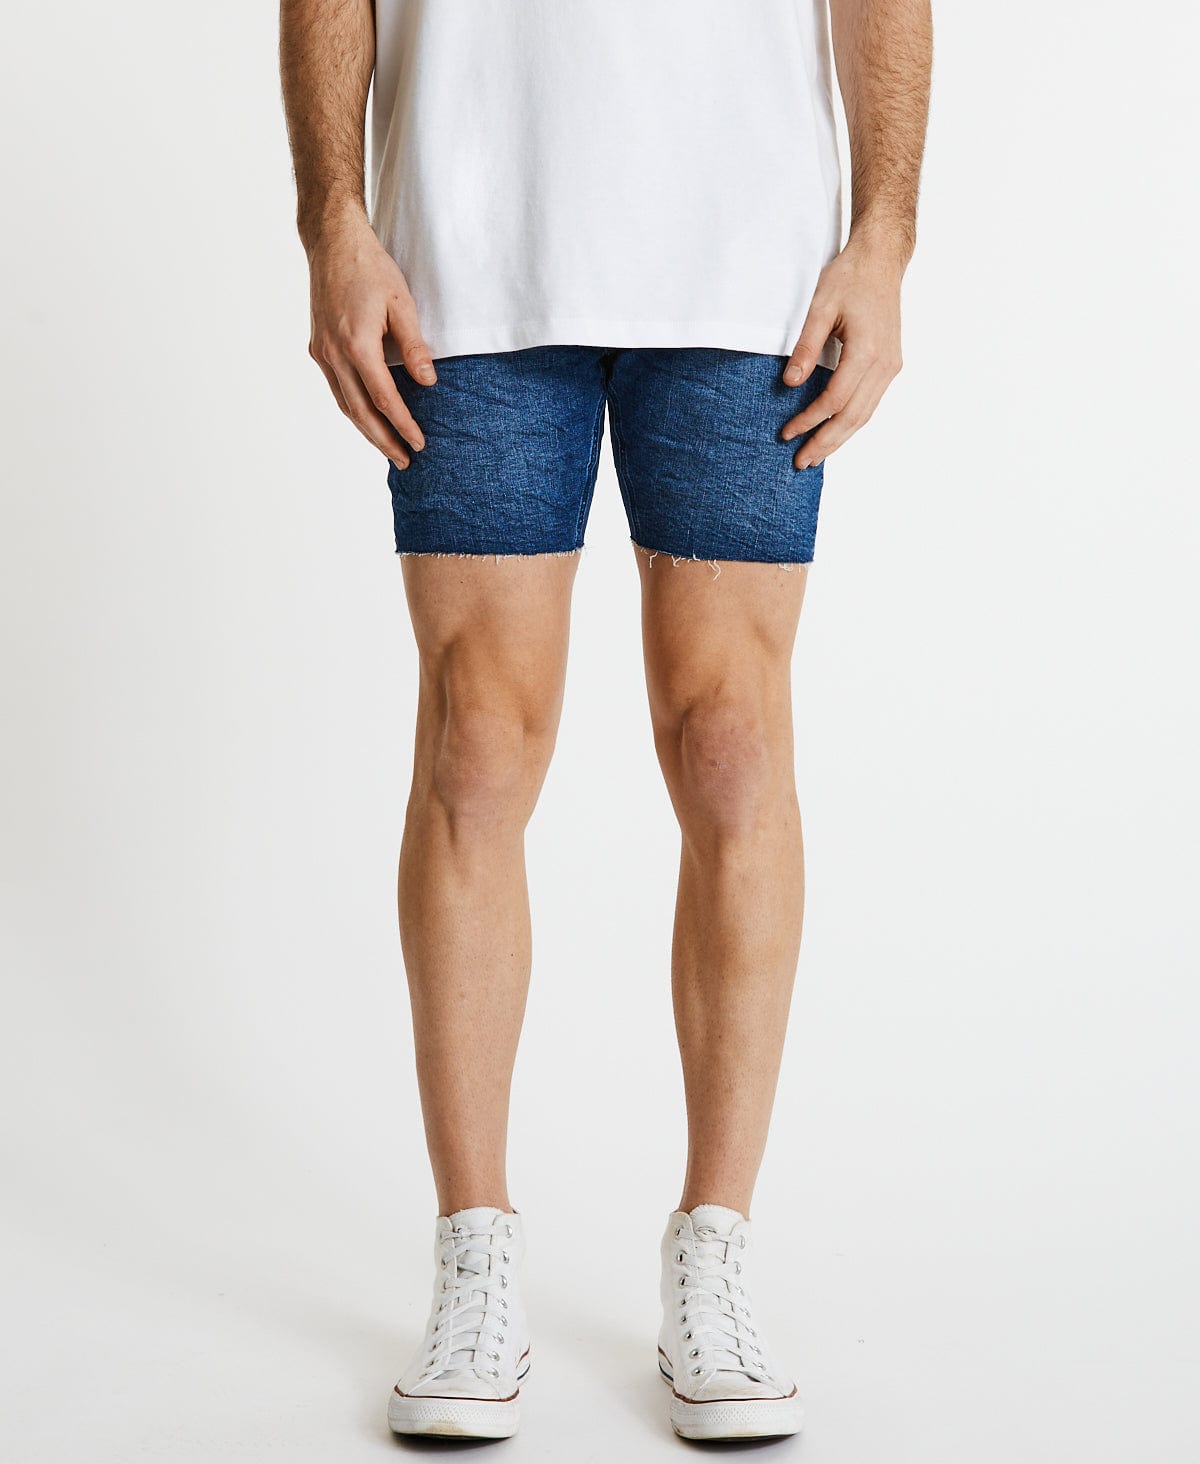 10 Best Denim Shorts For Only Under $100! - Stay at Home Mum